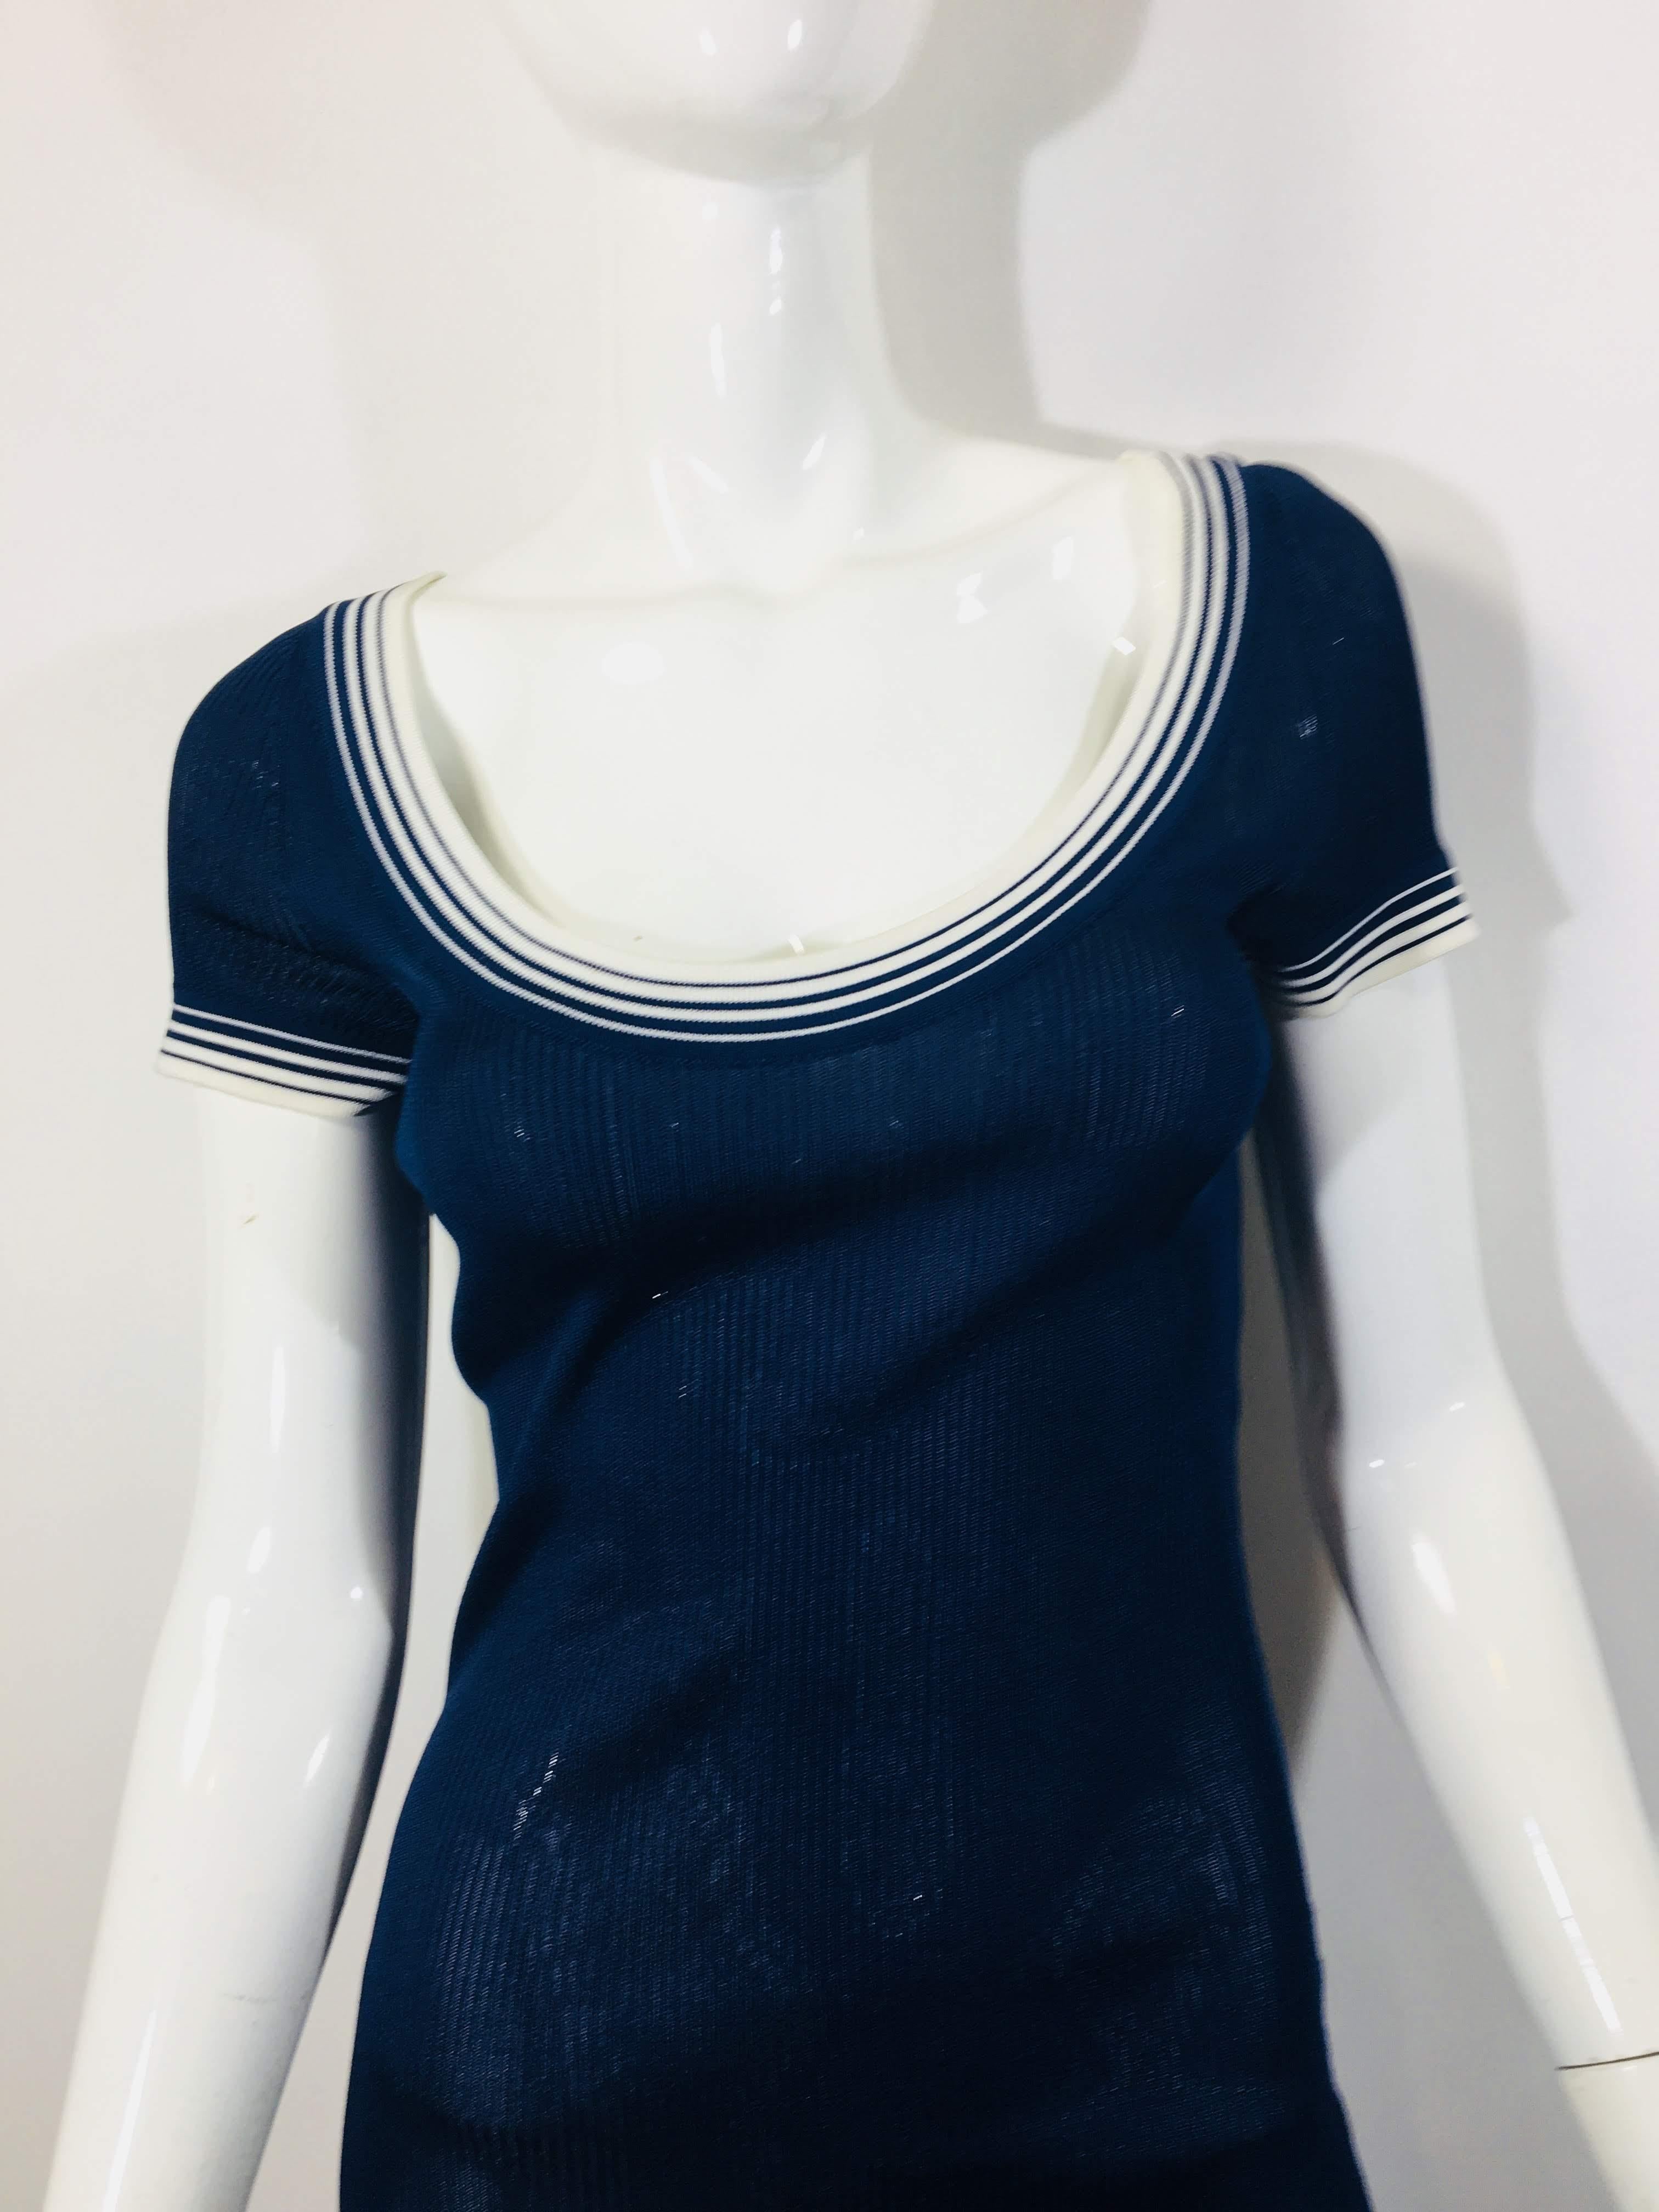 Herve Leger, Large Navy S/S  Knit Dress With Scoop Neck And White Stripe Trim 